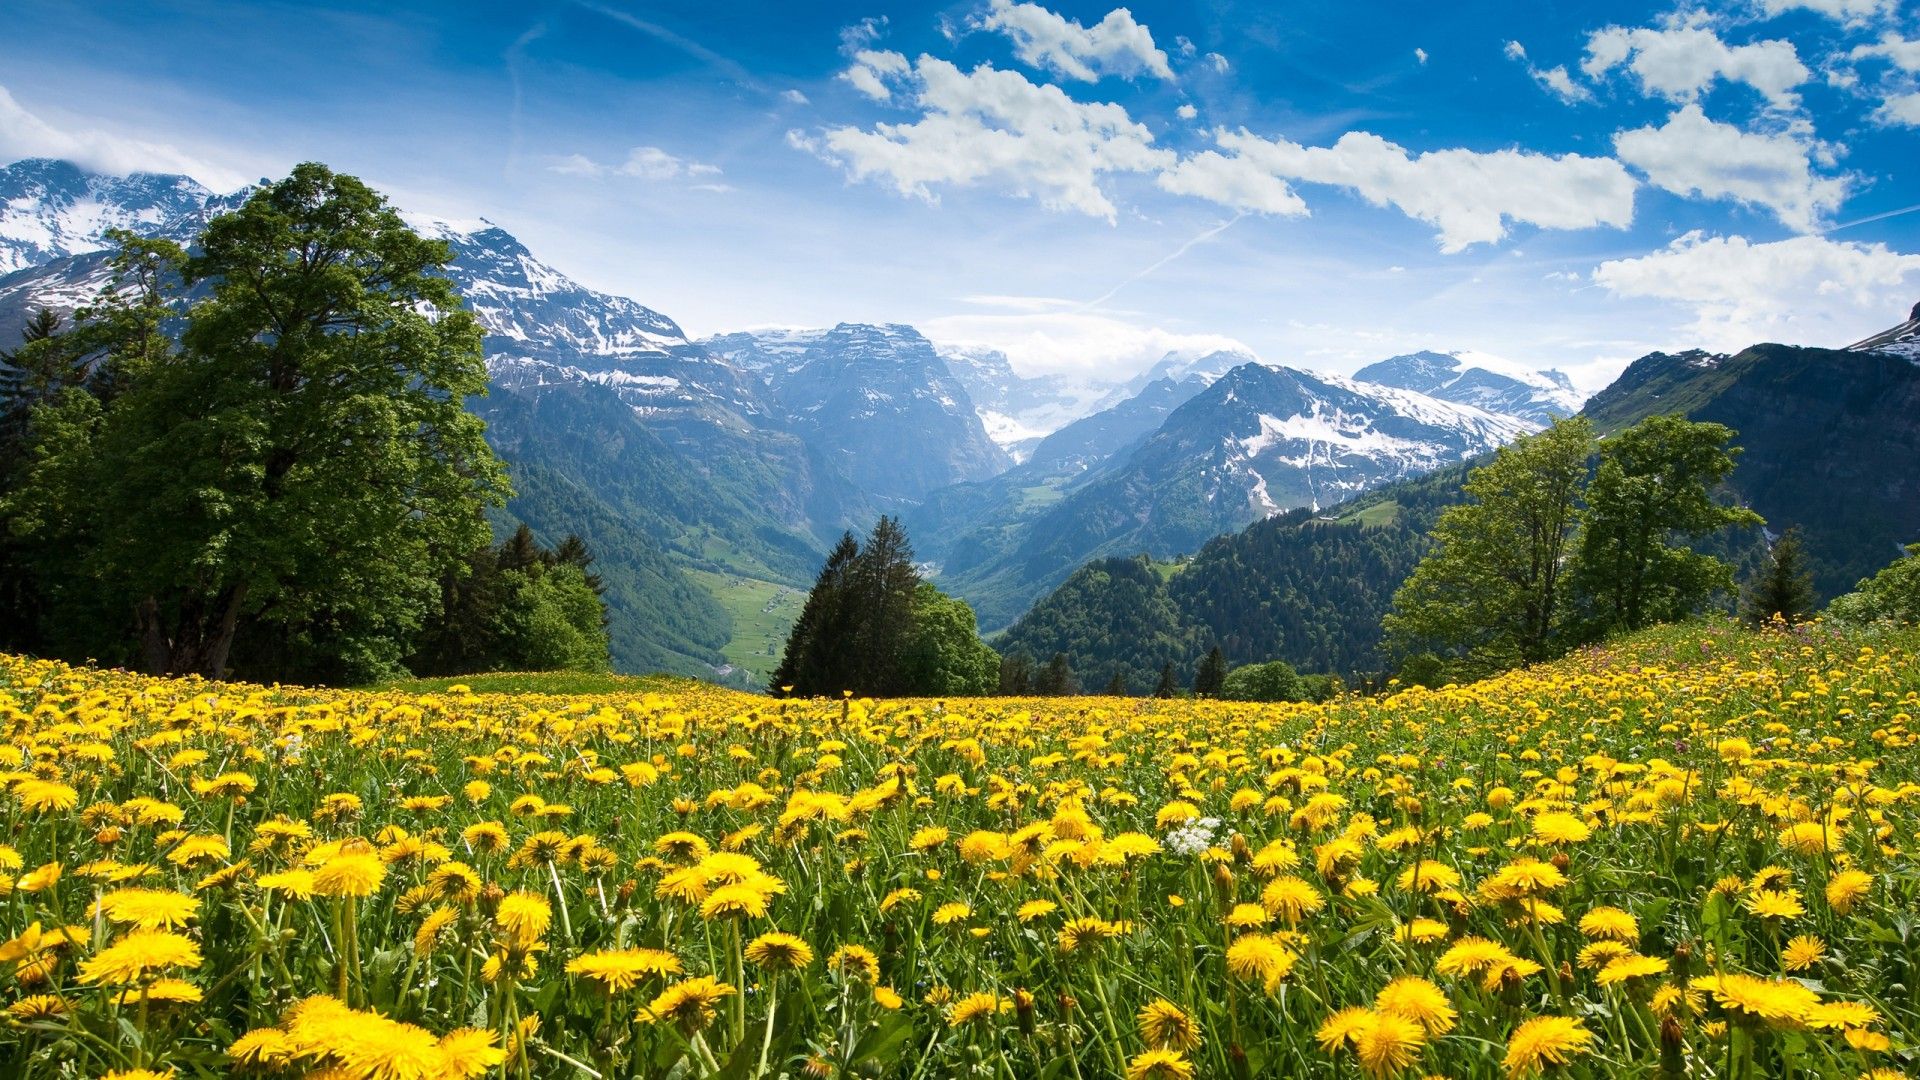 Mountains Fields Dandelions Sky Trees Nature Wallpaper And Photo